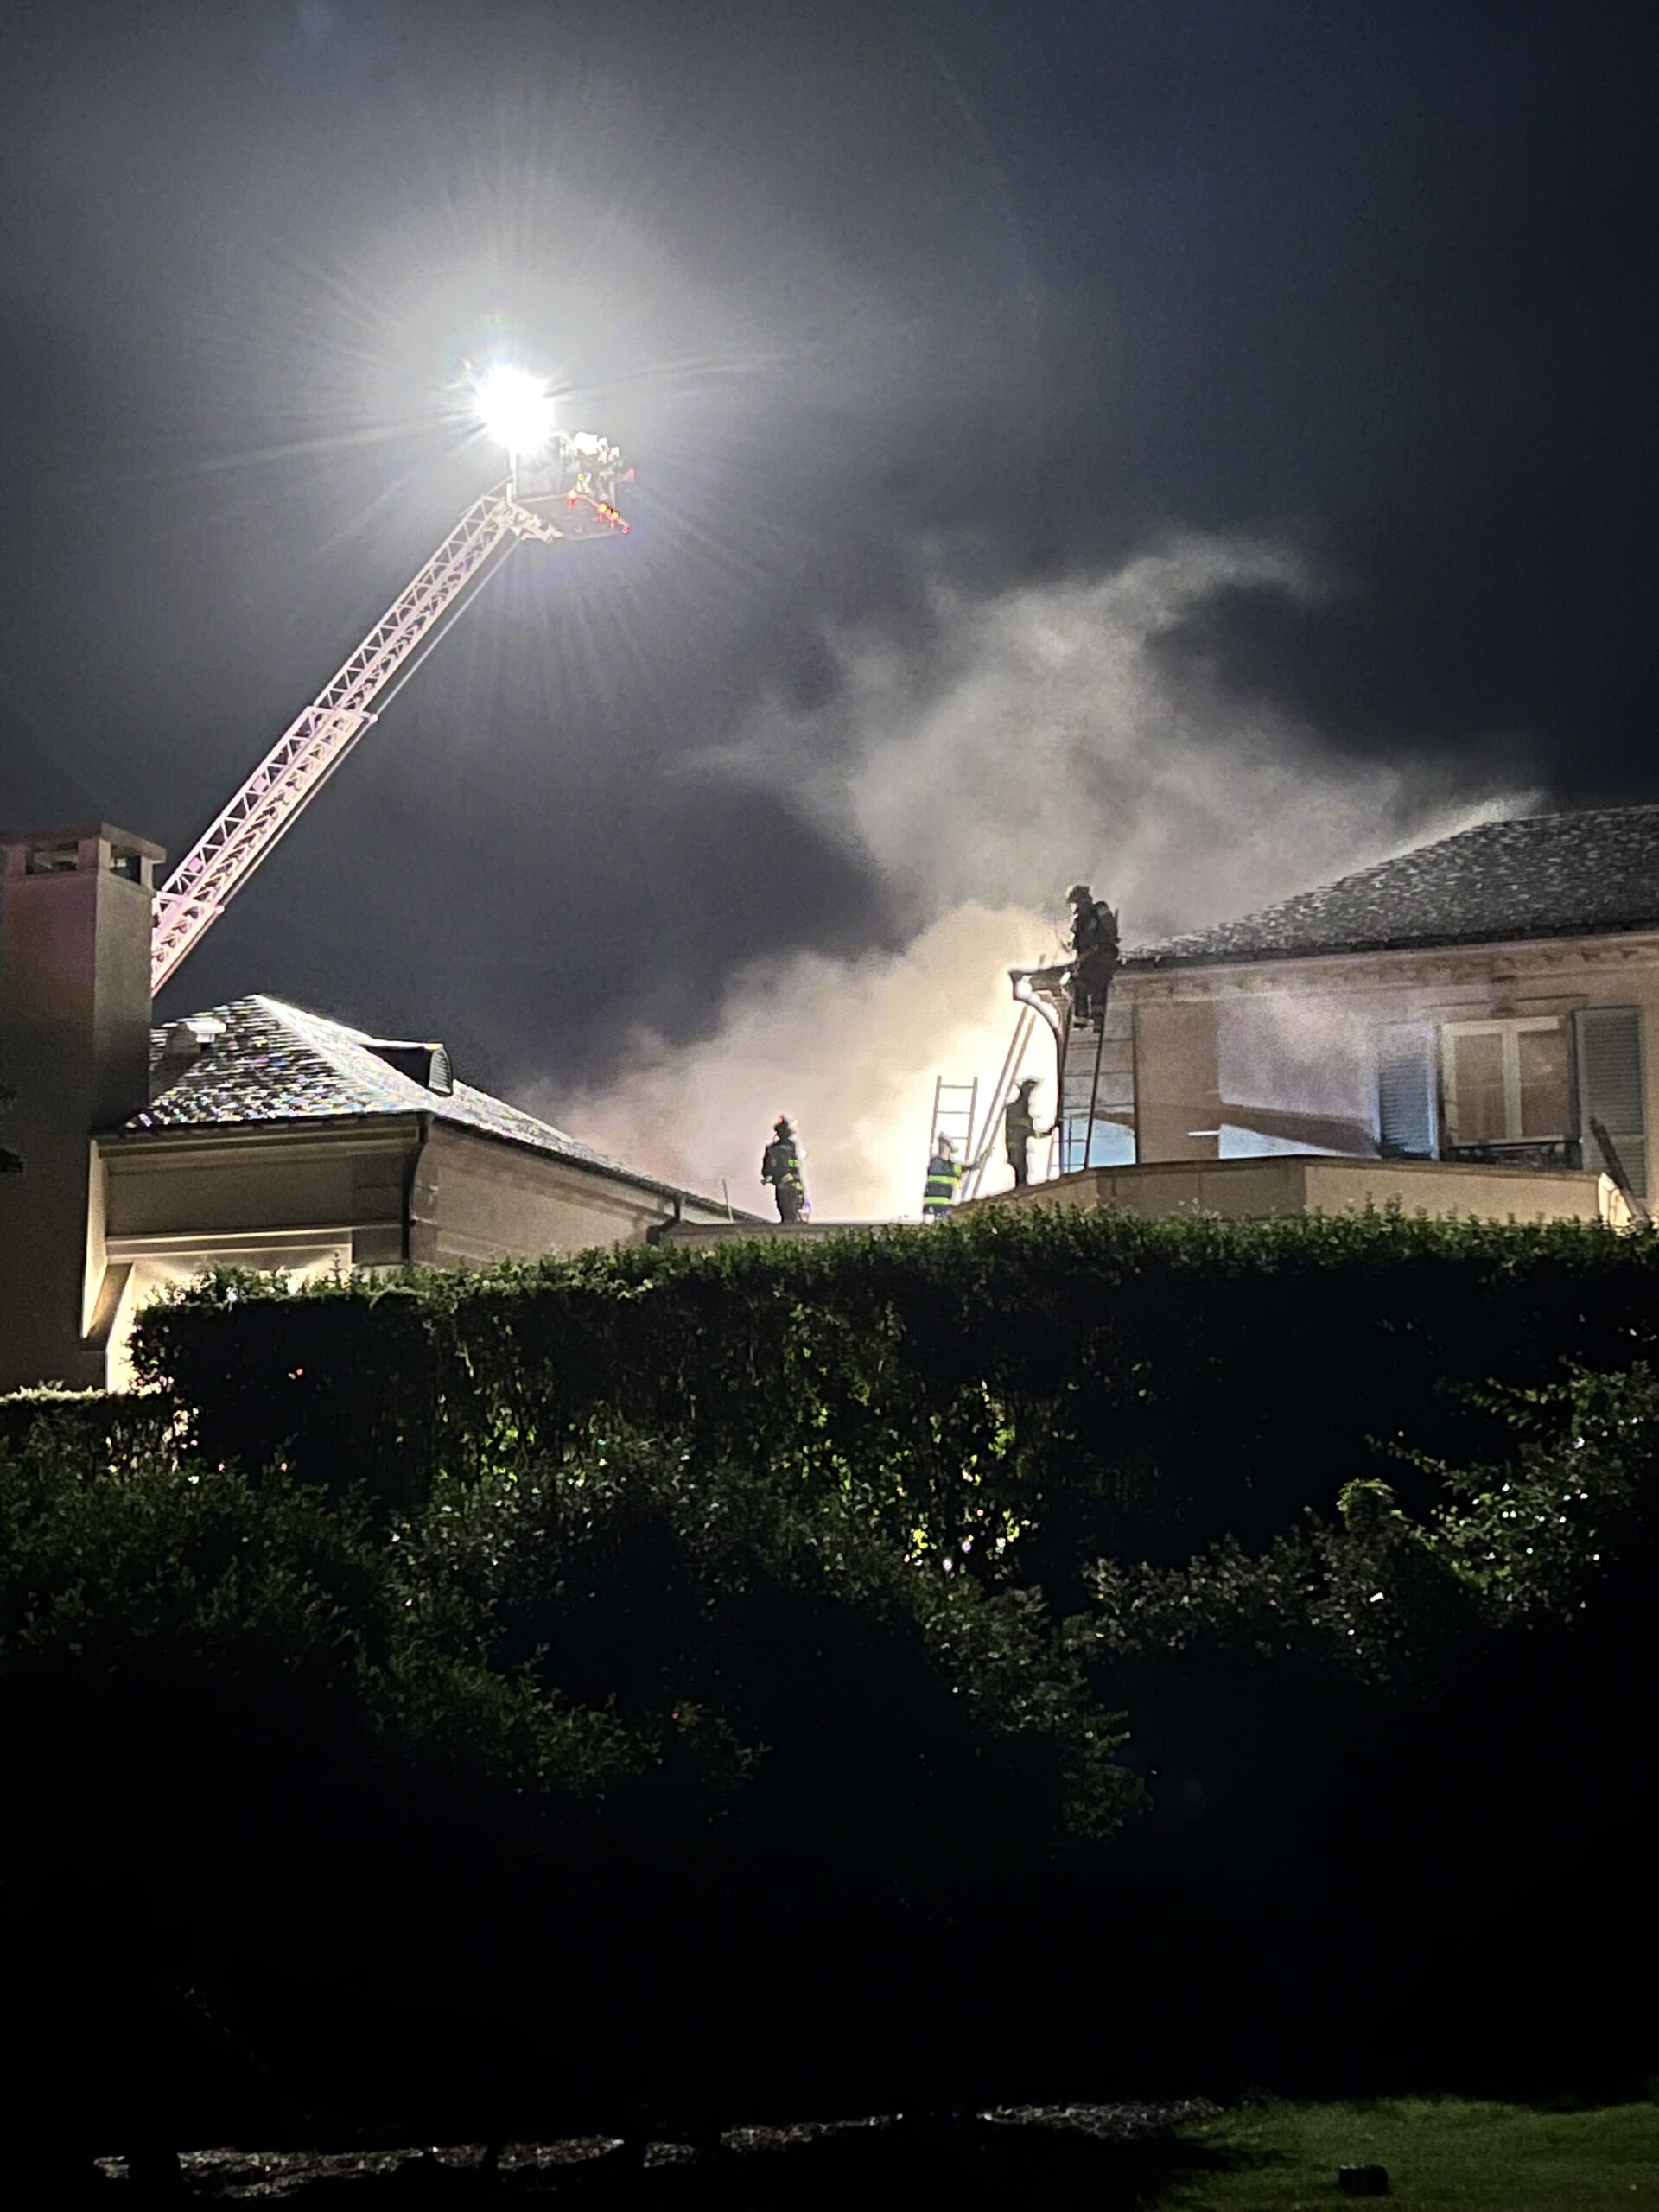 A Lily Pond Lane mansion caught fire on Tuesday evening.